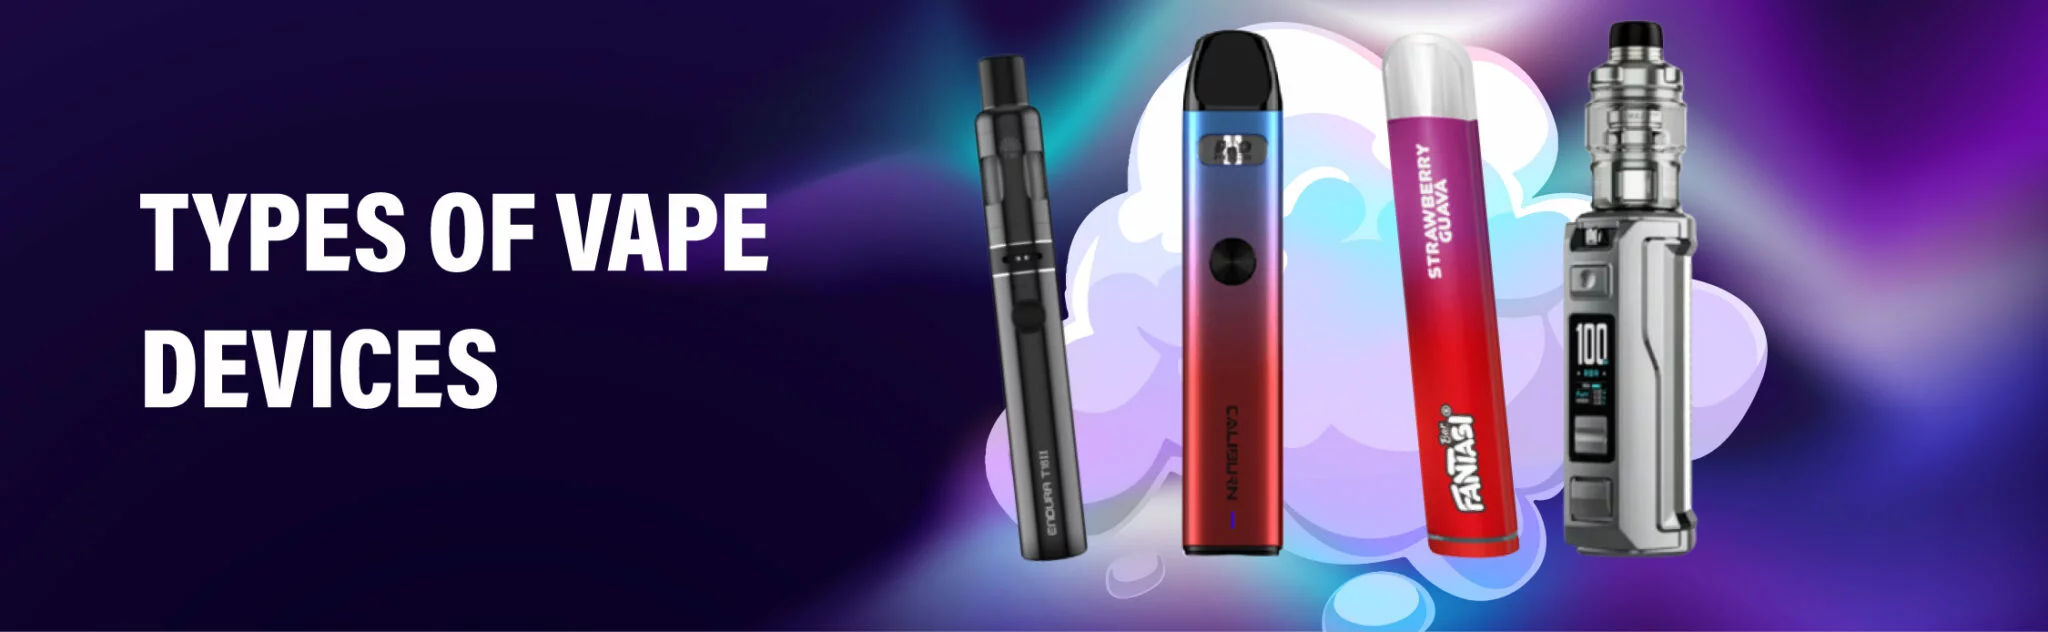 best vape for heavy smoker -- types of devices